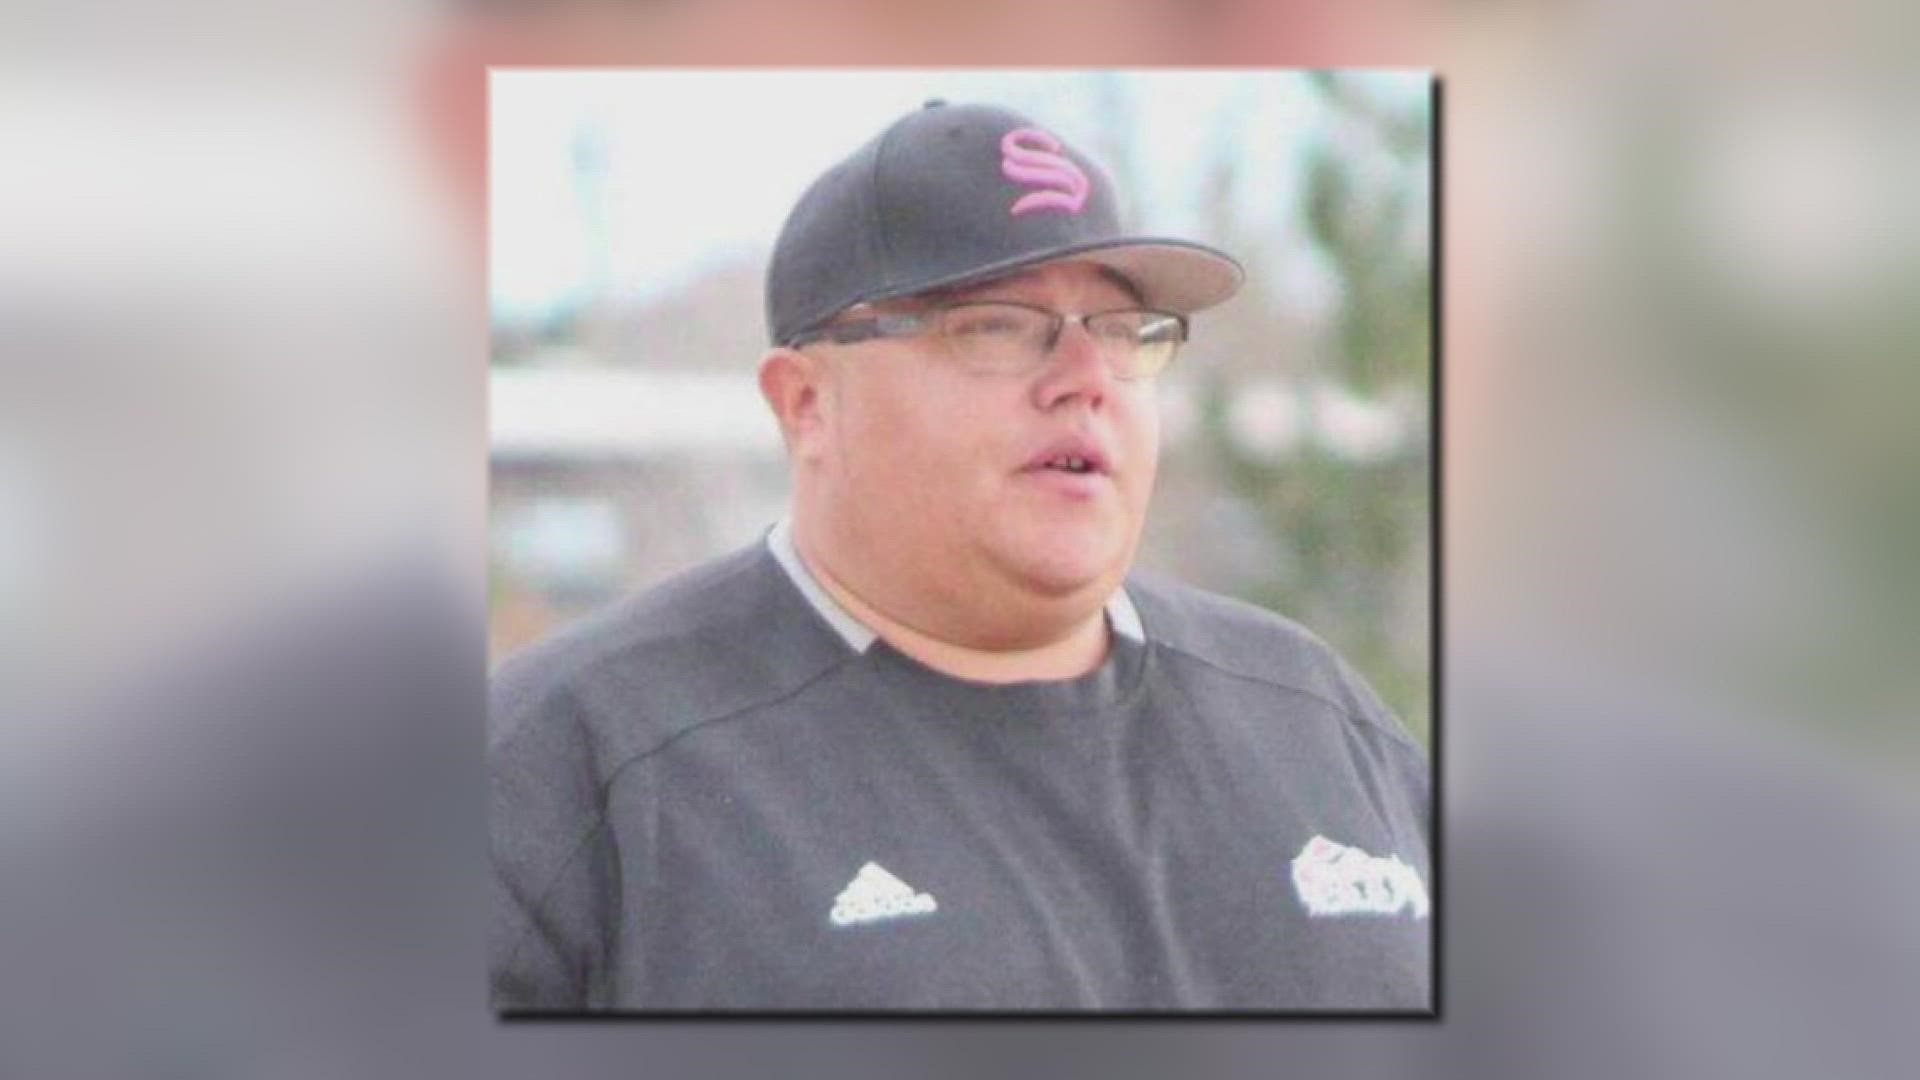 The former softball coach at Cherry Creek High School is accused of soliciting nude photos from an underage girl in Virginia.